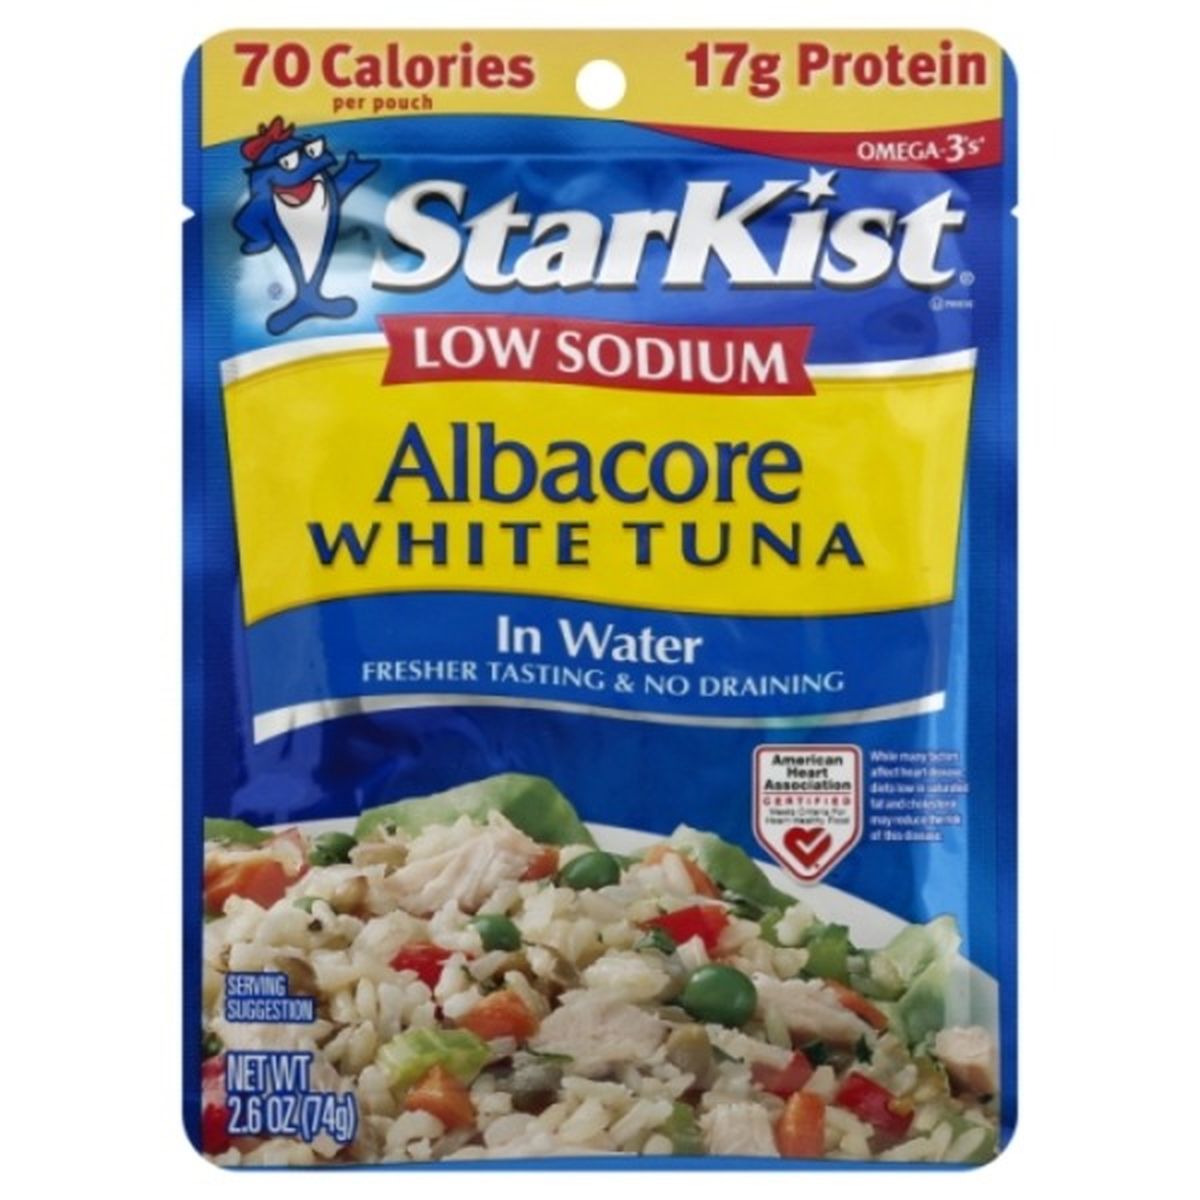 Calories in StarKists Tuna, Low Sodium, Albacore White, in Water